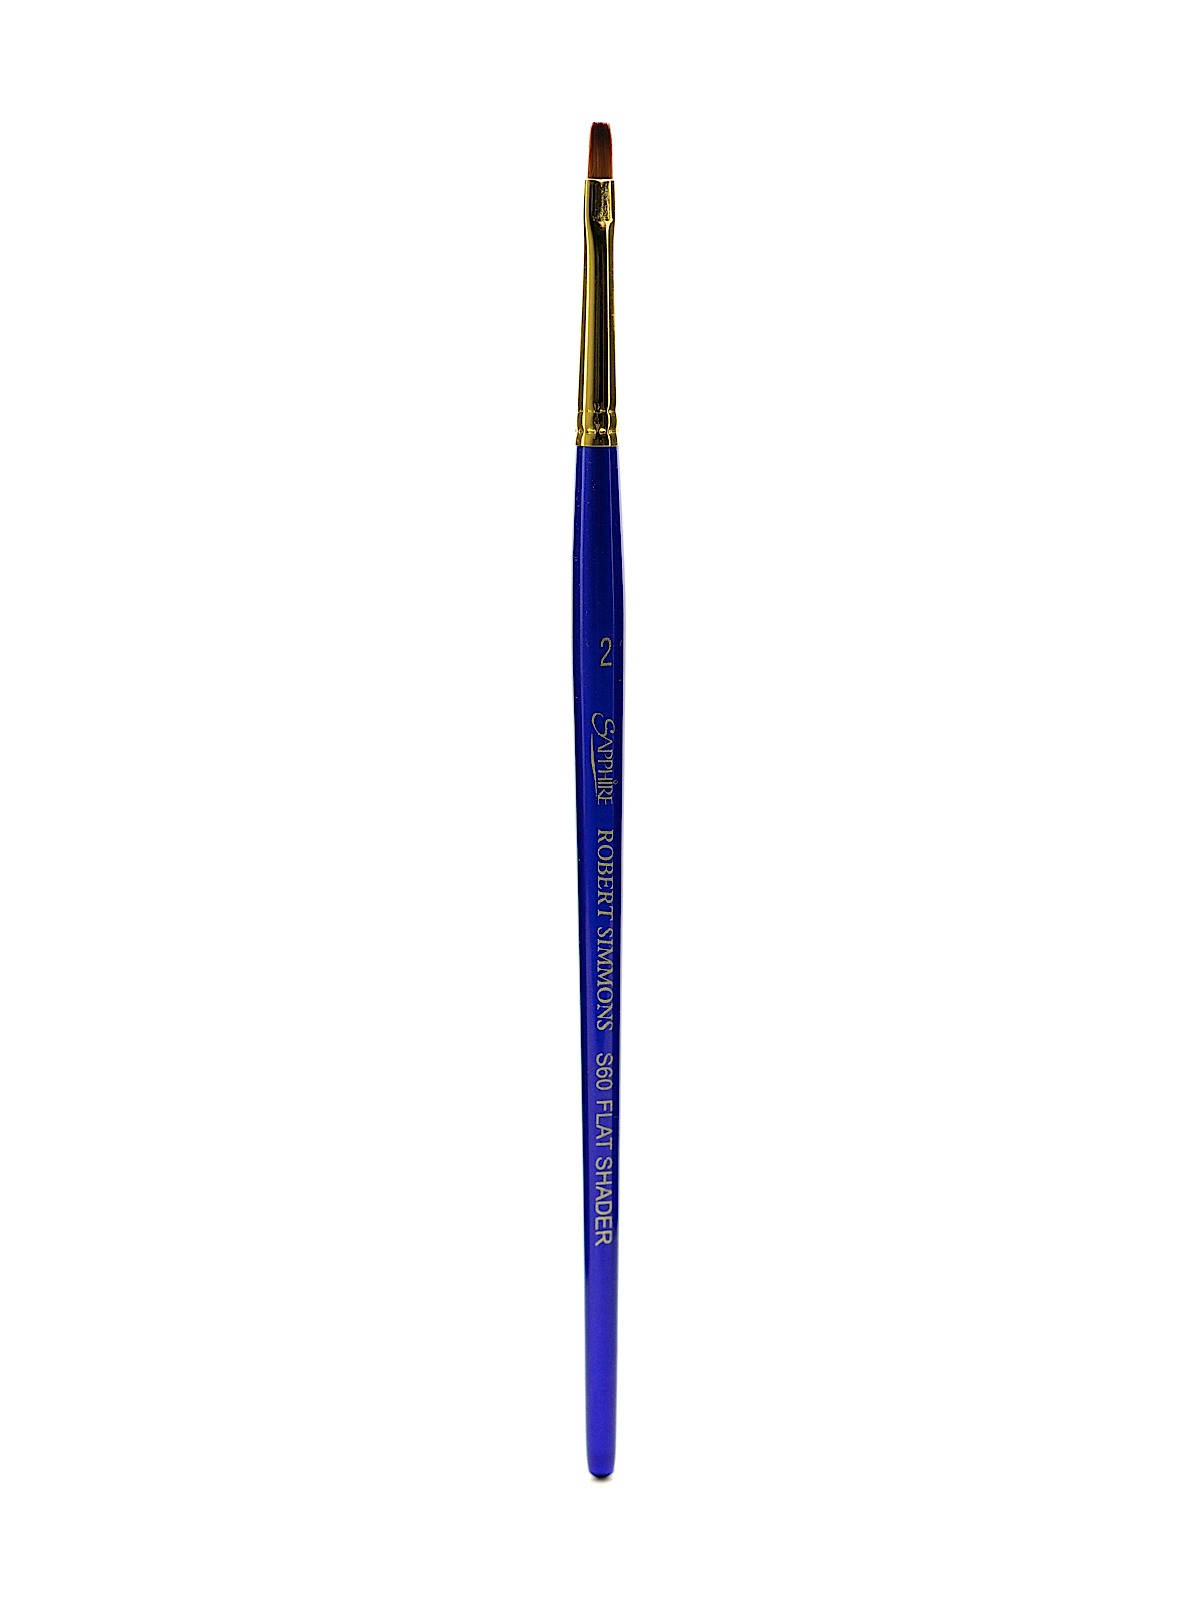 Sapphire Series Synthetic Brushes Short Handle 2 Shader S60